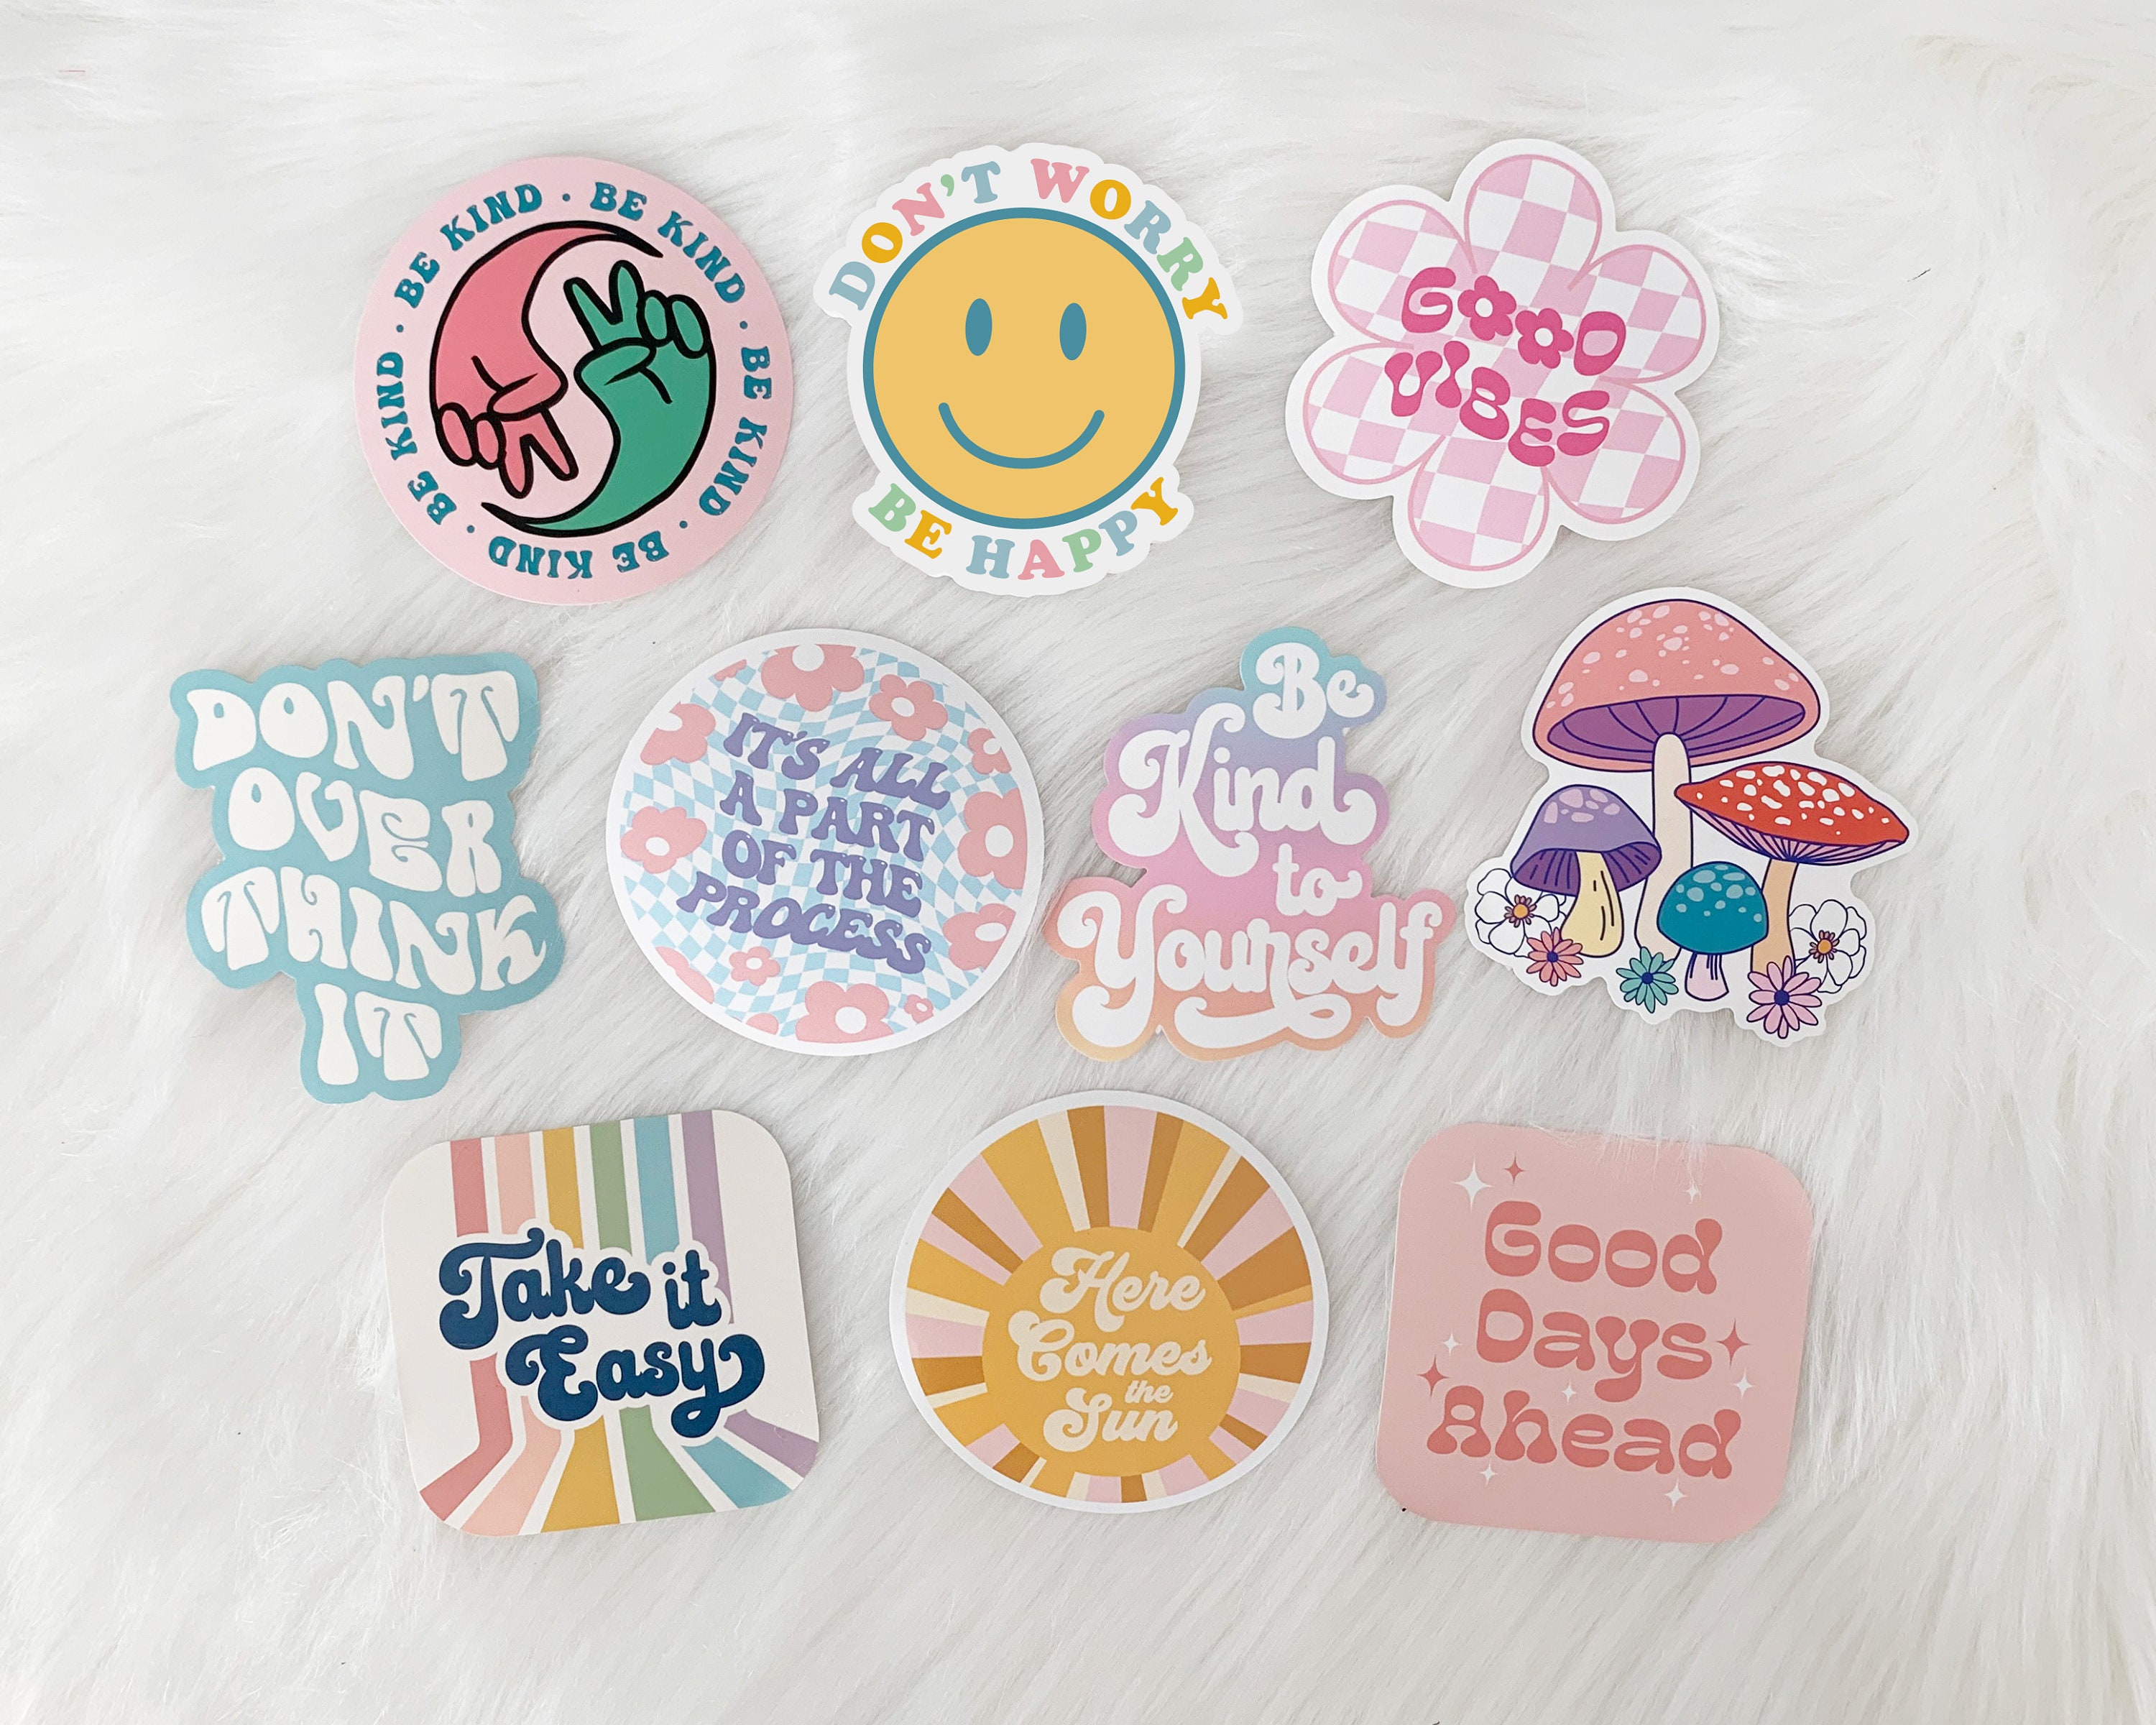 Inspirational Preppy Stickers Aesthetic Stickers 50pcs, Pink Things Stickers for Water Bottles Laptop Eikecy Danish Pastel Stickers for Kids Adults